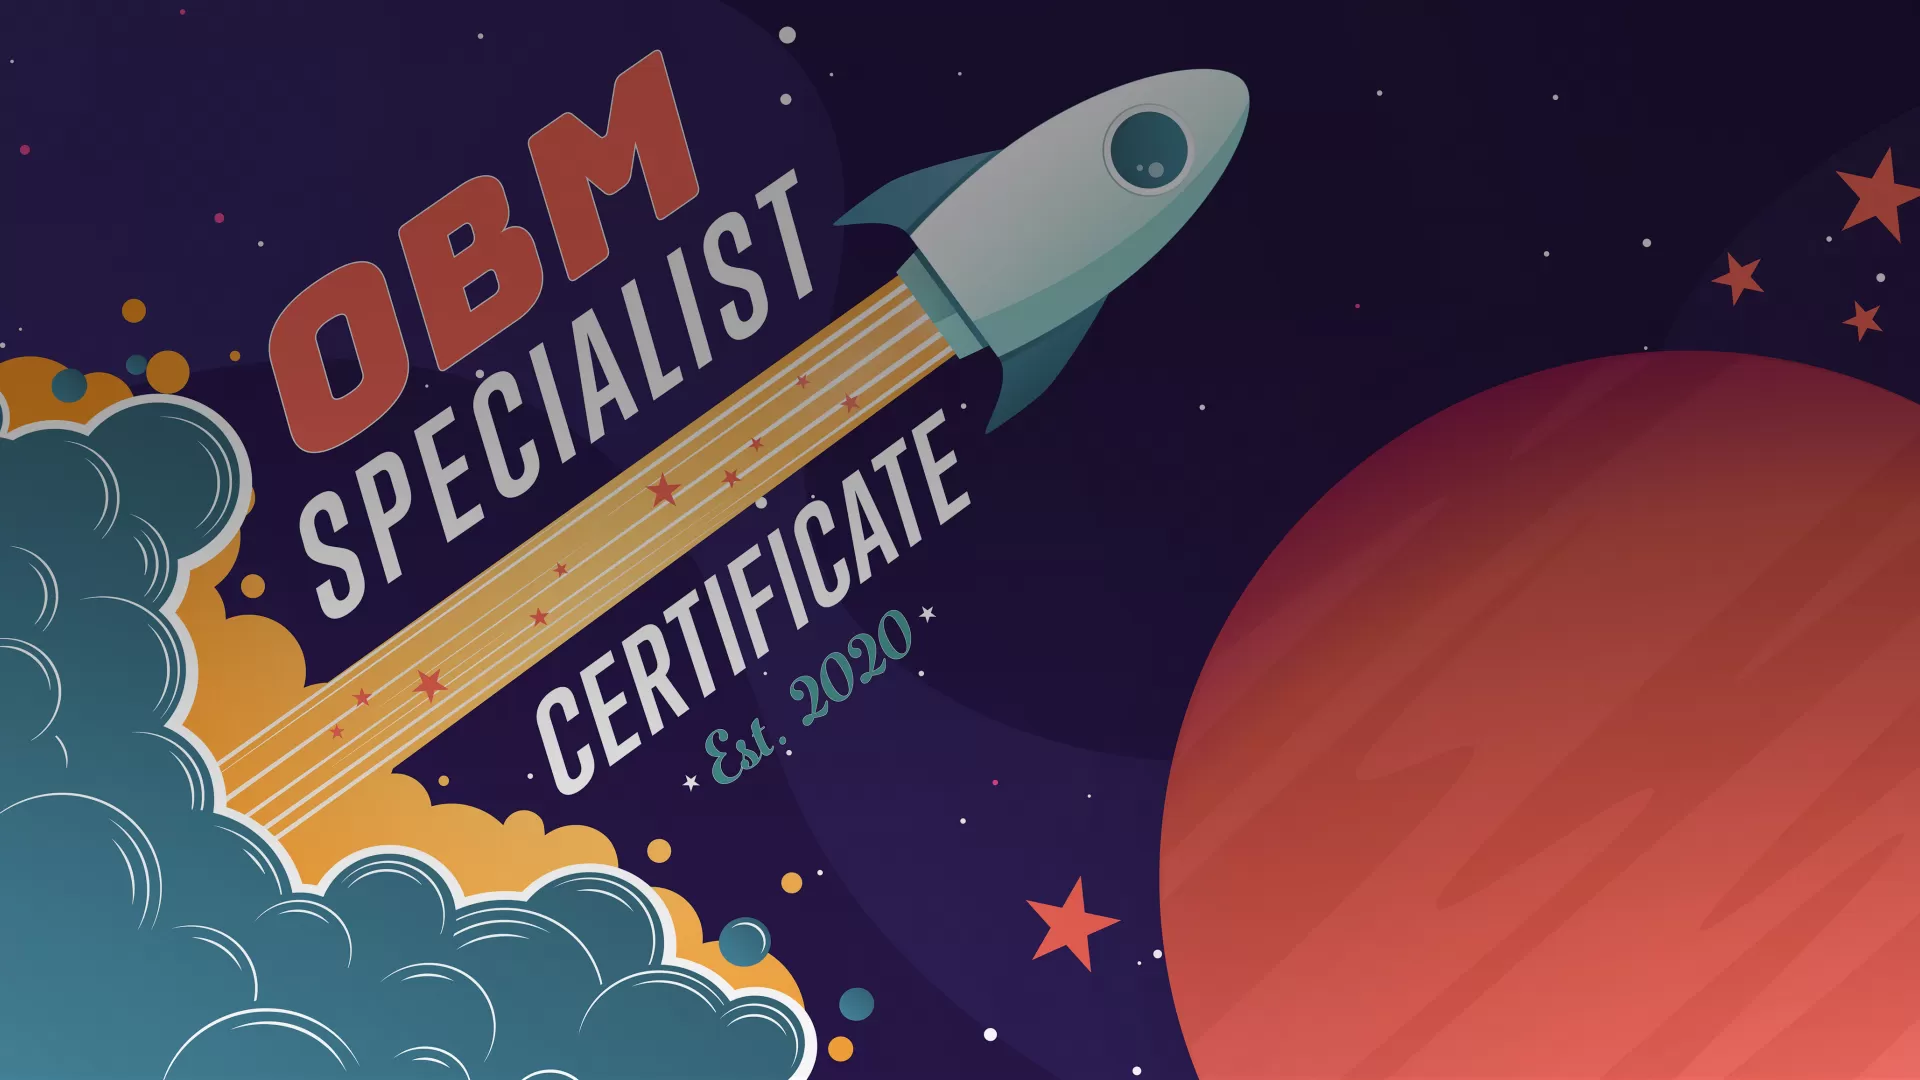 OBM Specialist Certificate cartoon rocket and space